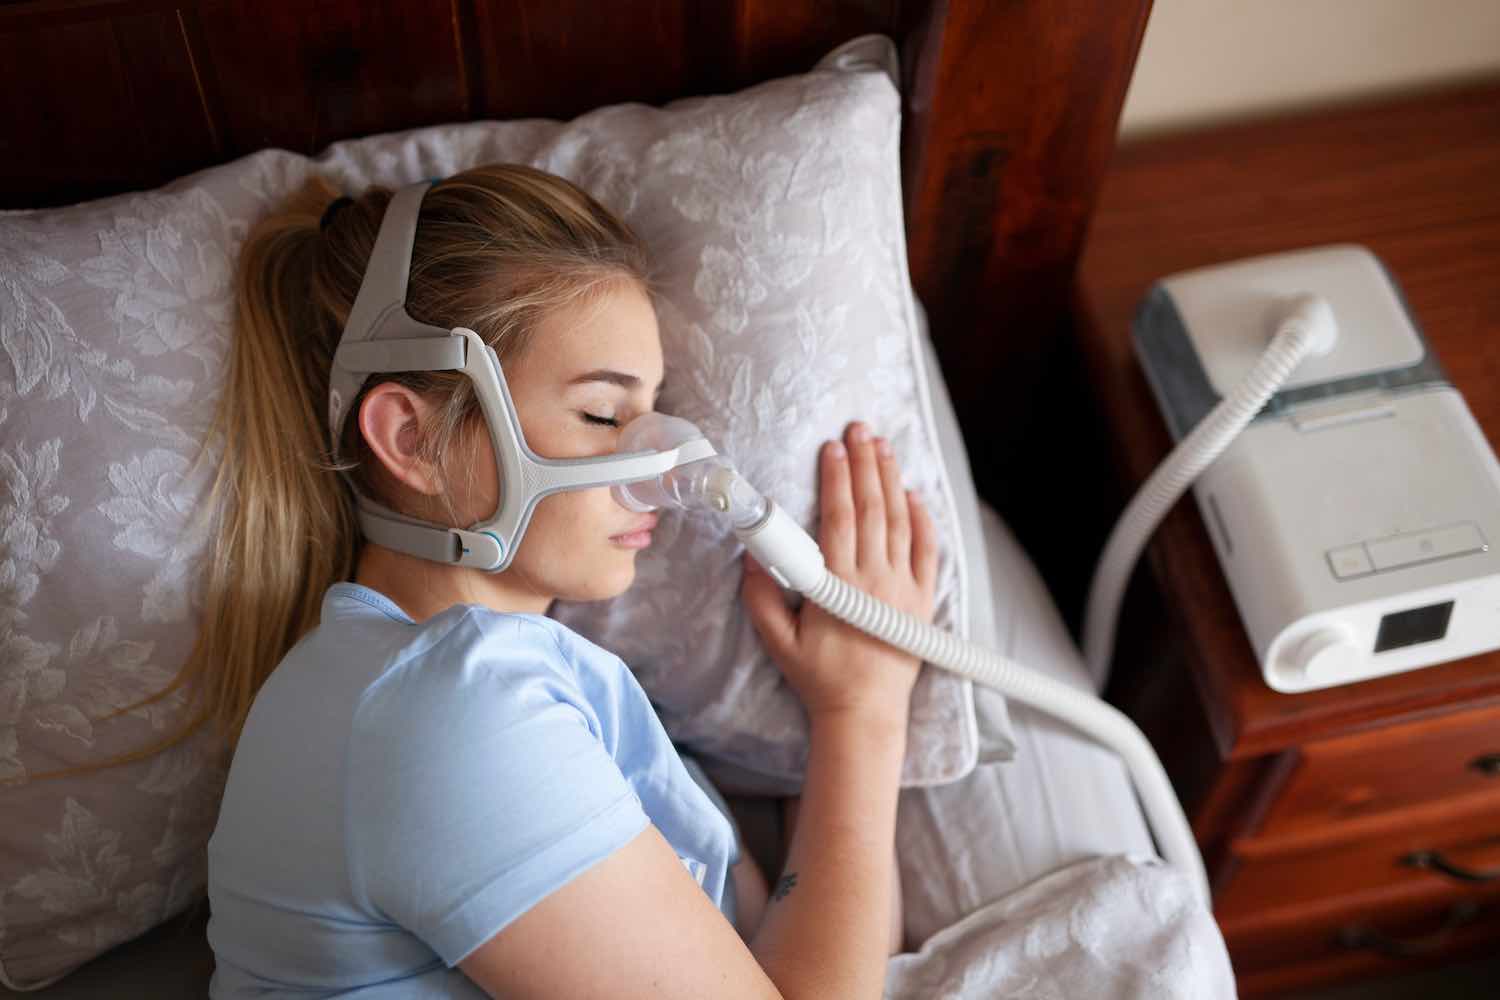 How to use your CPAP machine all night